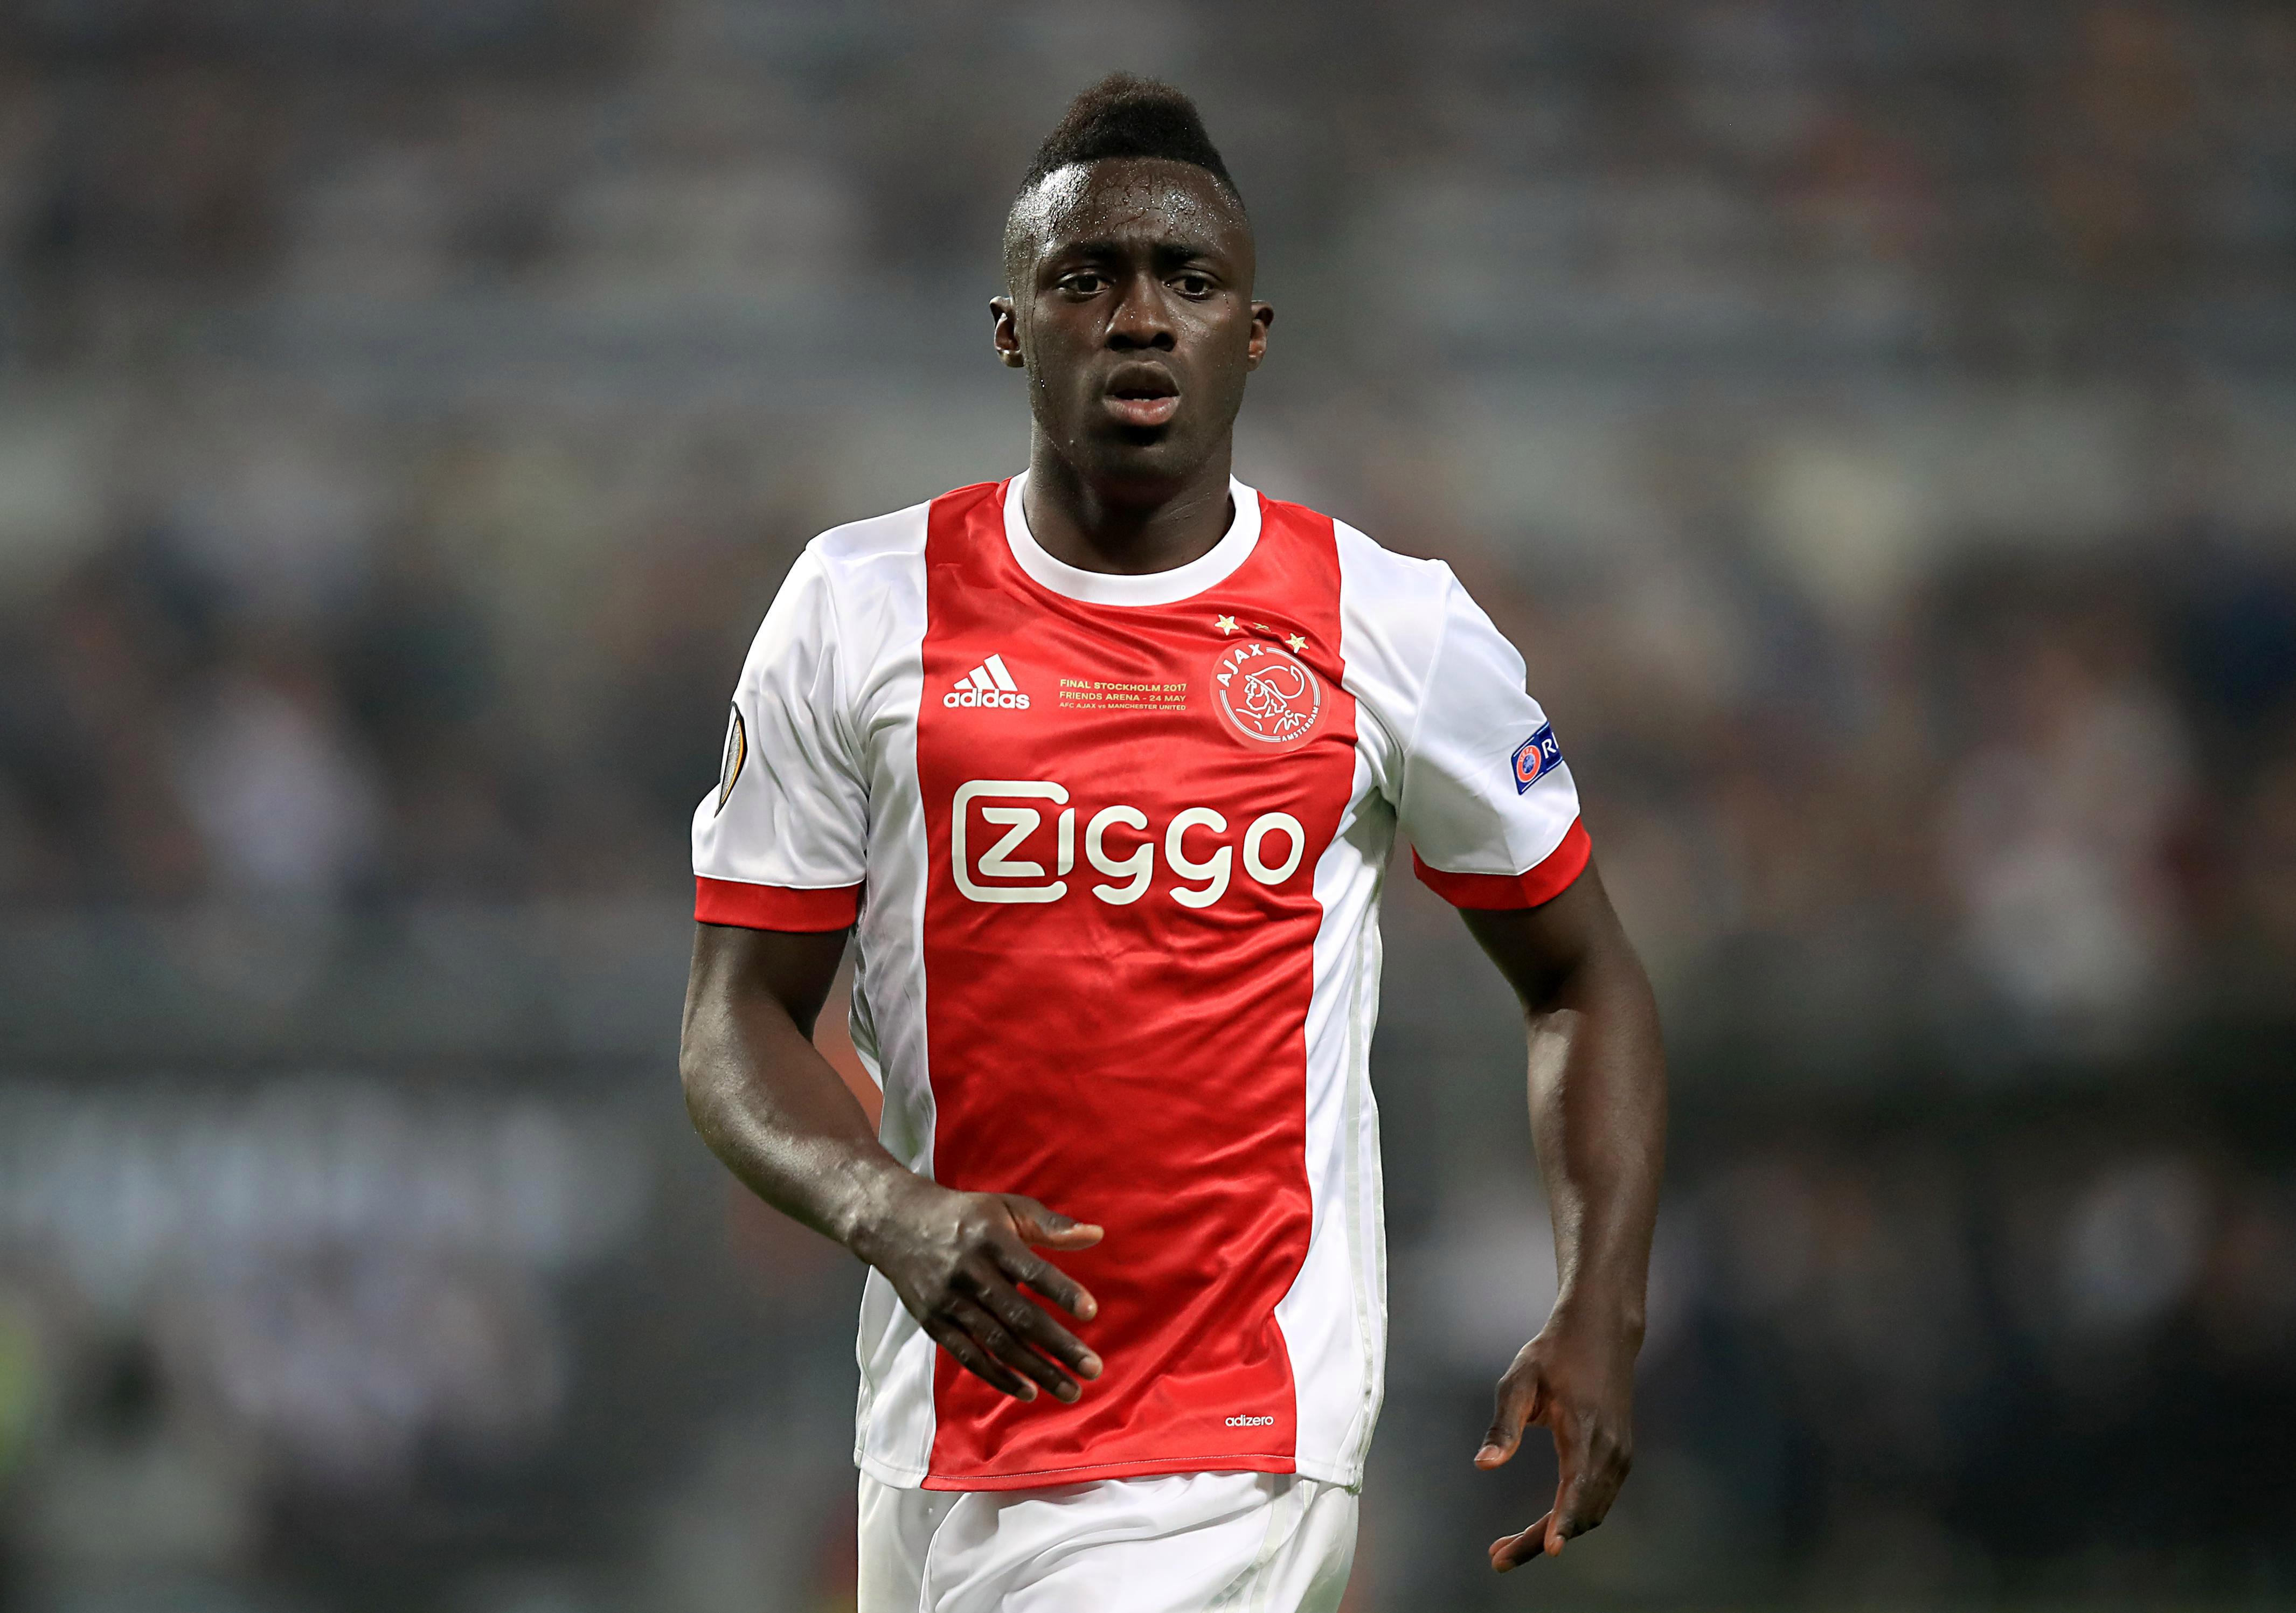 Tottenham announce Davinson Sanchez will join club in a £35m deal and will wear the No6 shirt